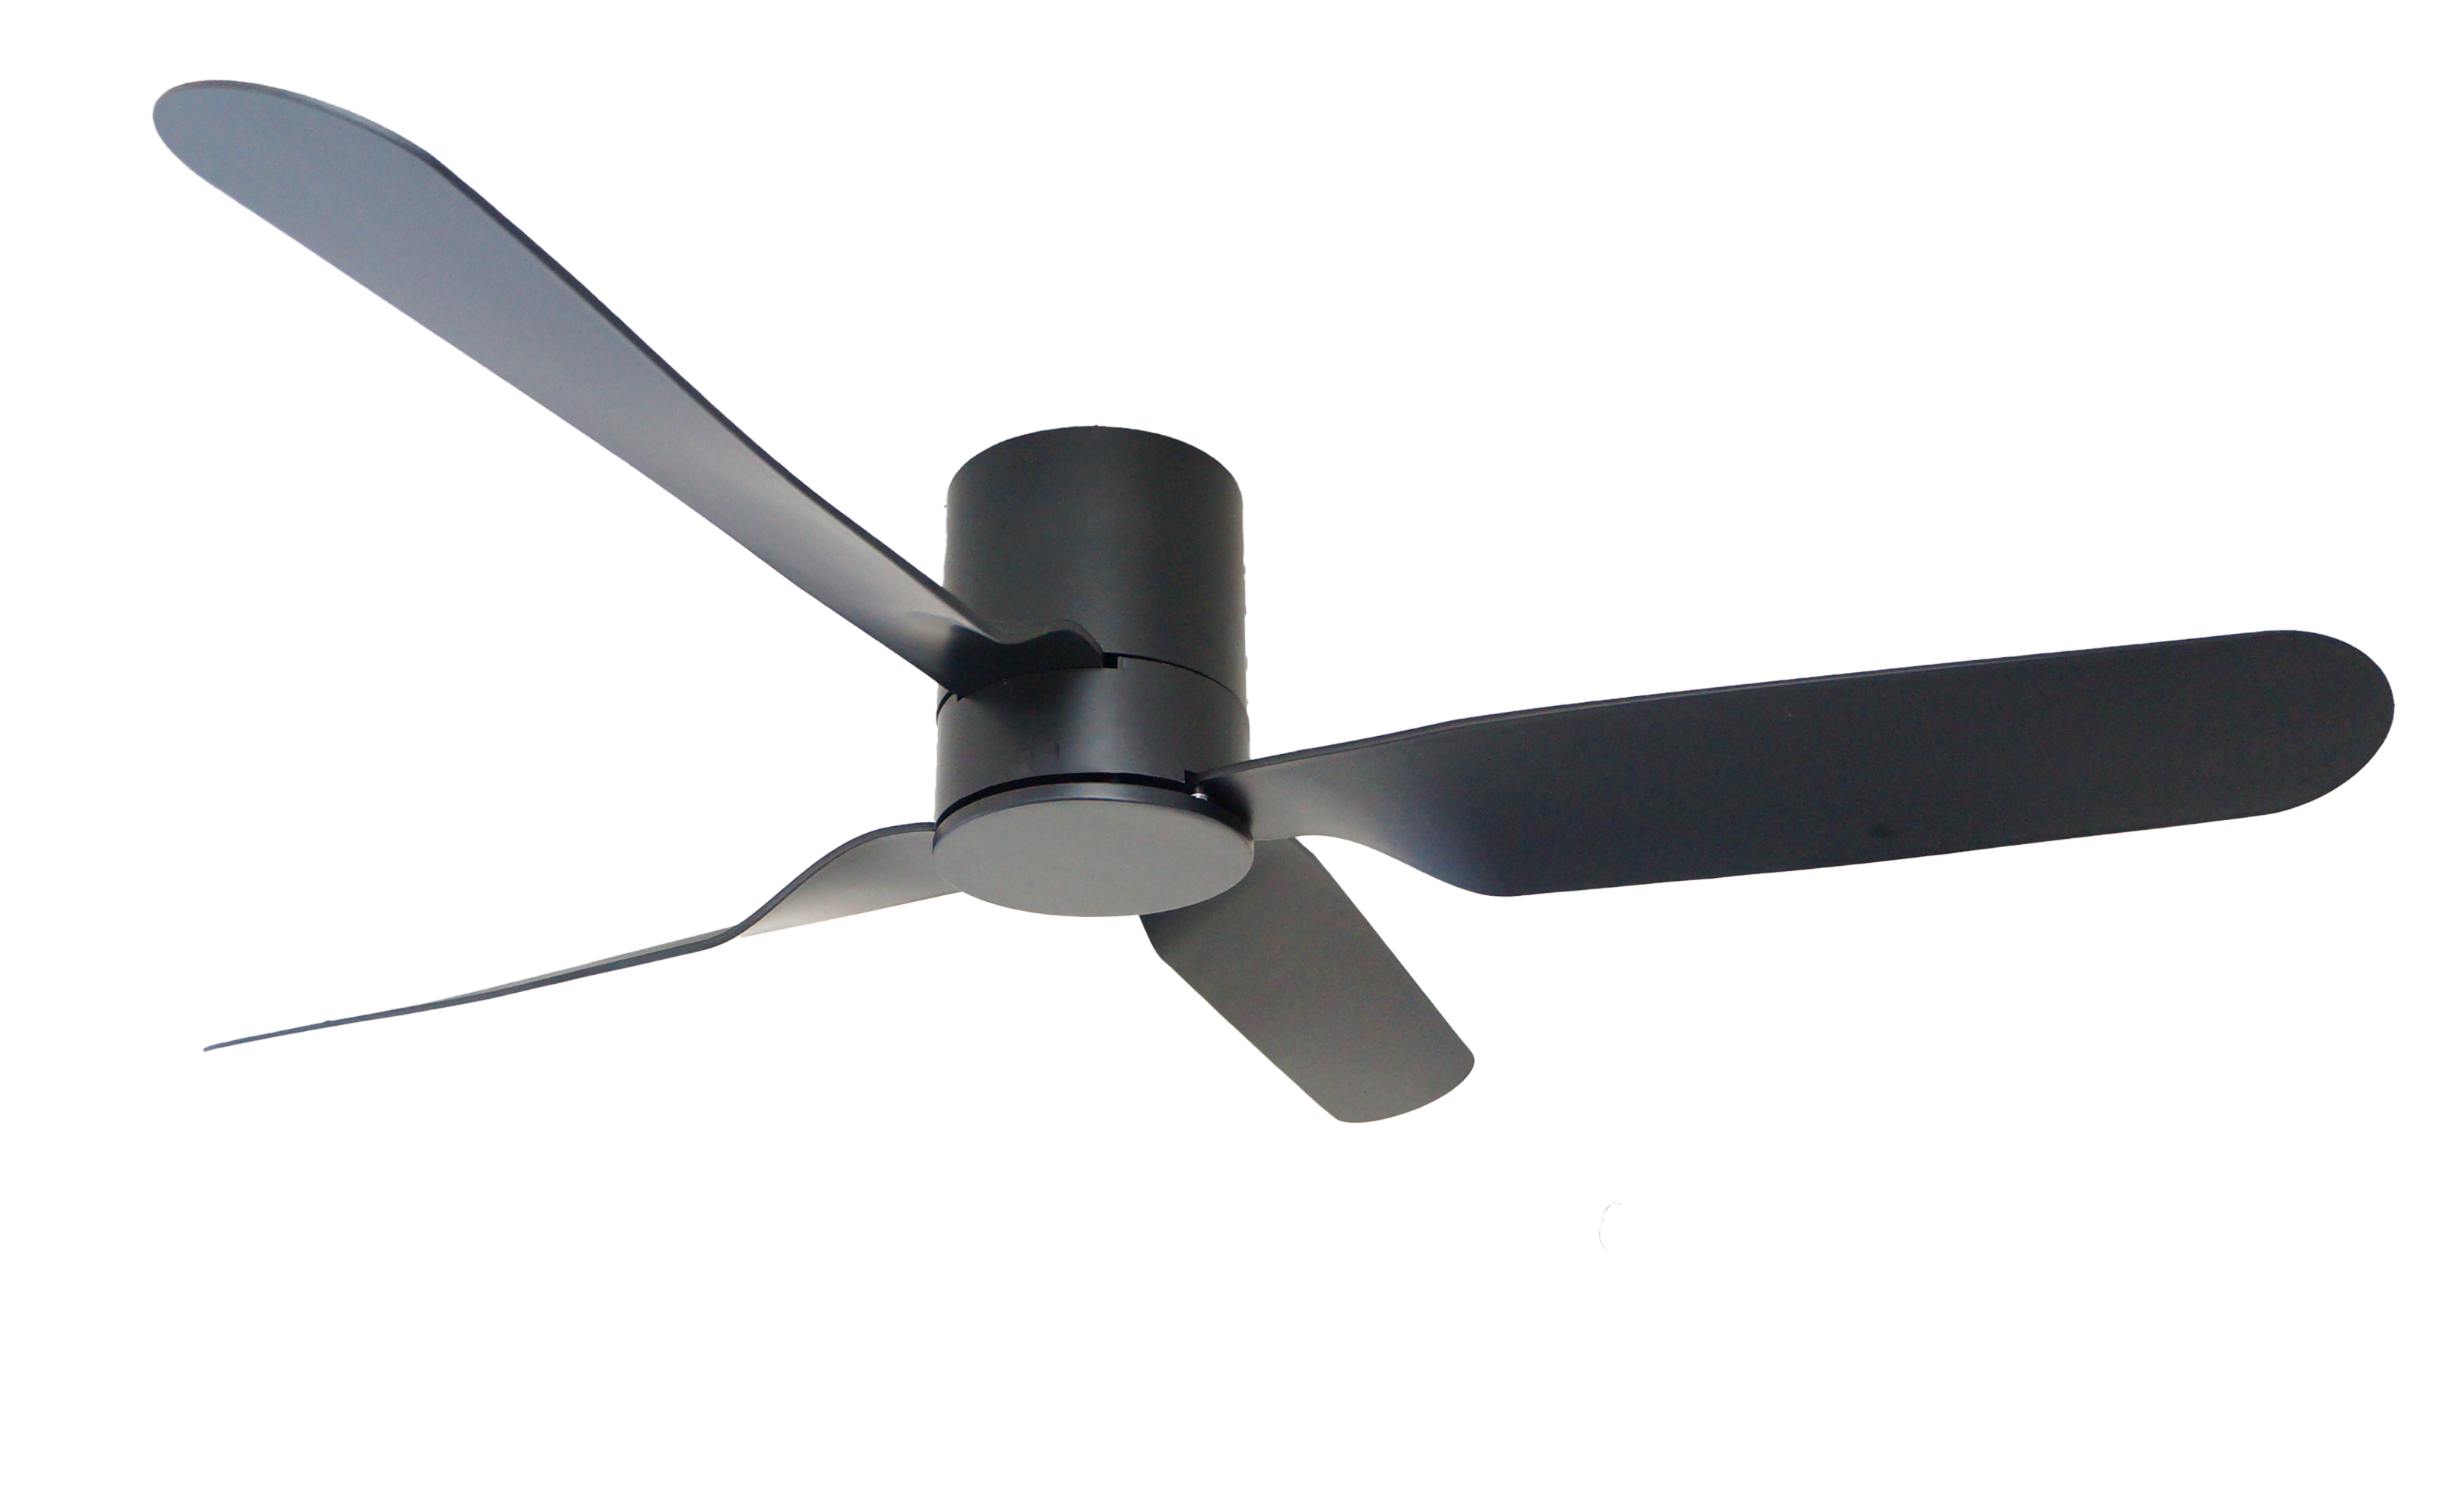 Airbena 42" ABS Ceiling Fan with Light: The Ideal Choice for Modern Homes